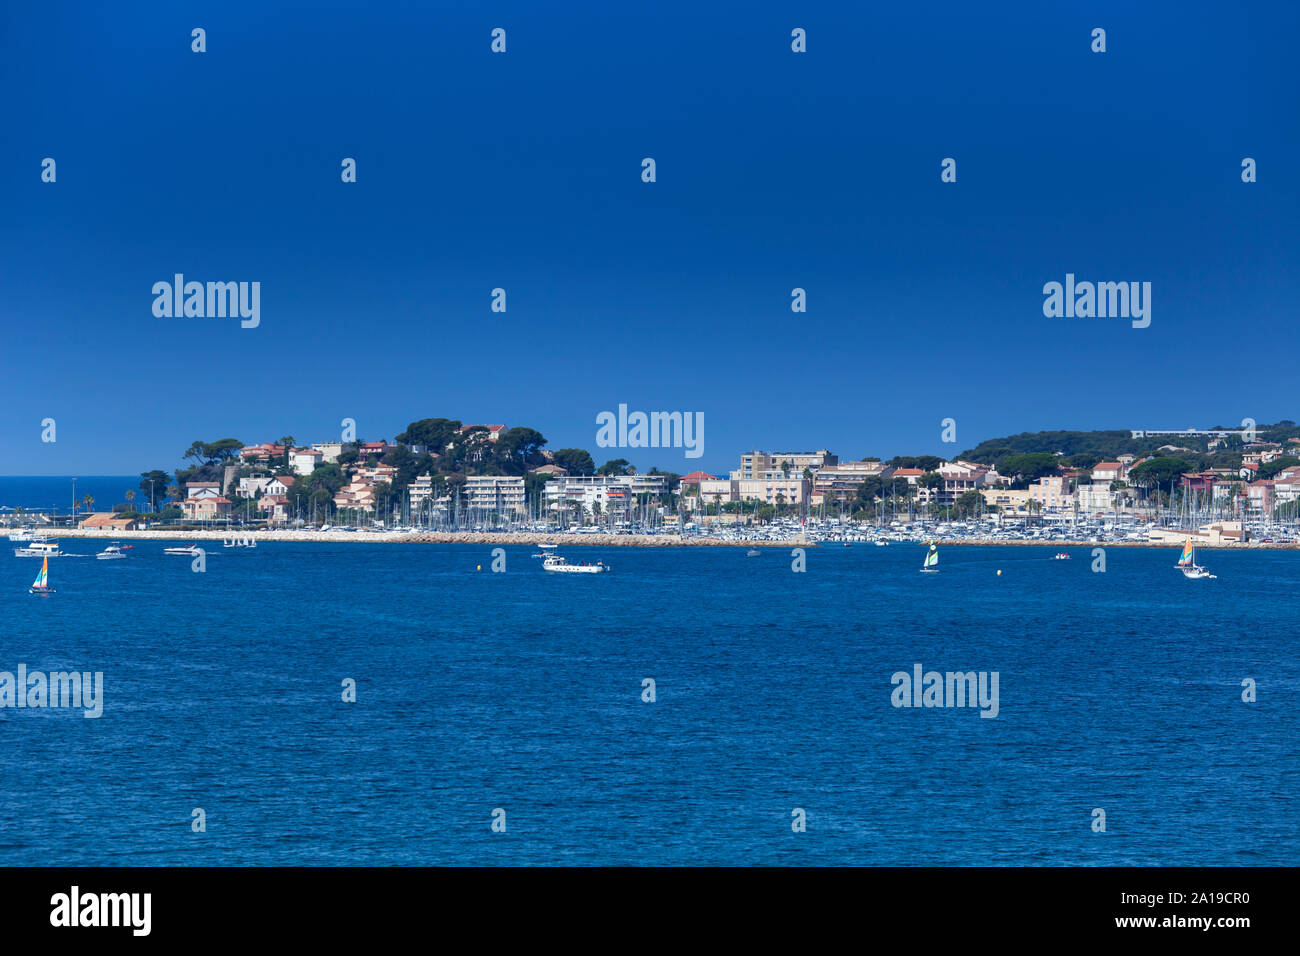 Coastline with hotel facilities at the Bale de Bandol, Bay of Bandol, Alpes-Maritimes, Cote d'Azur, Southern France, France, Europe Stock Photo